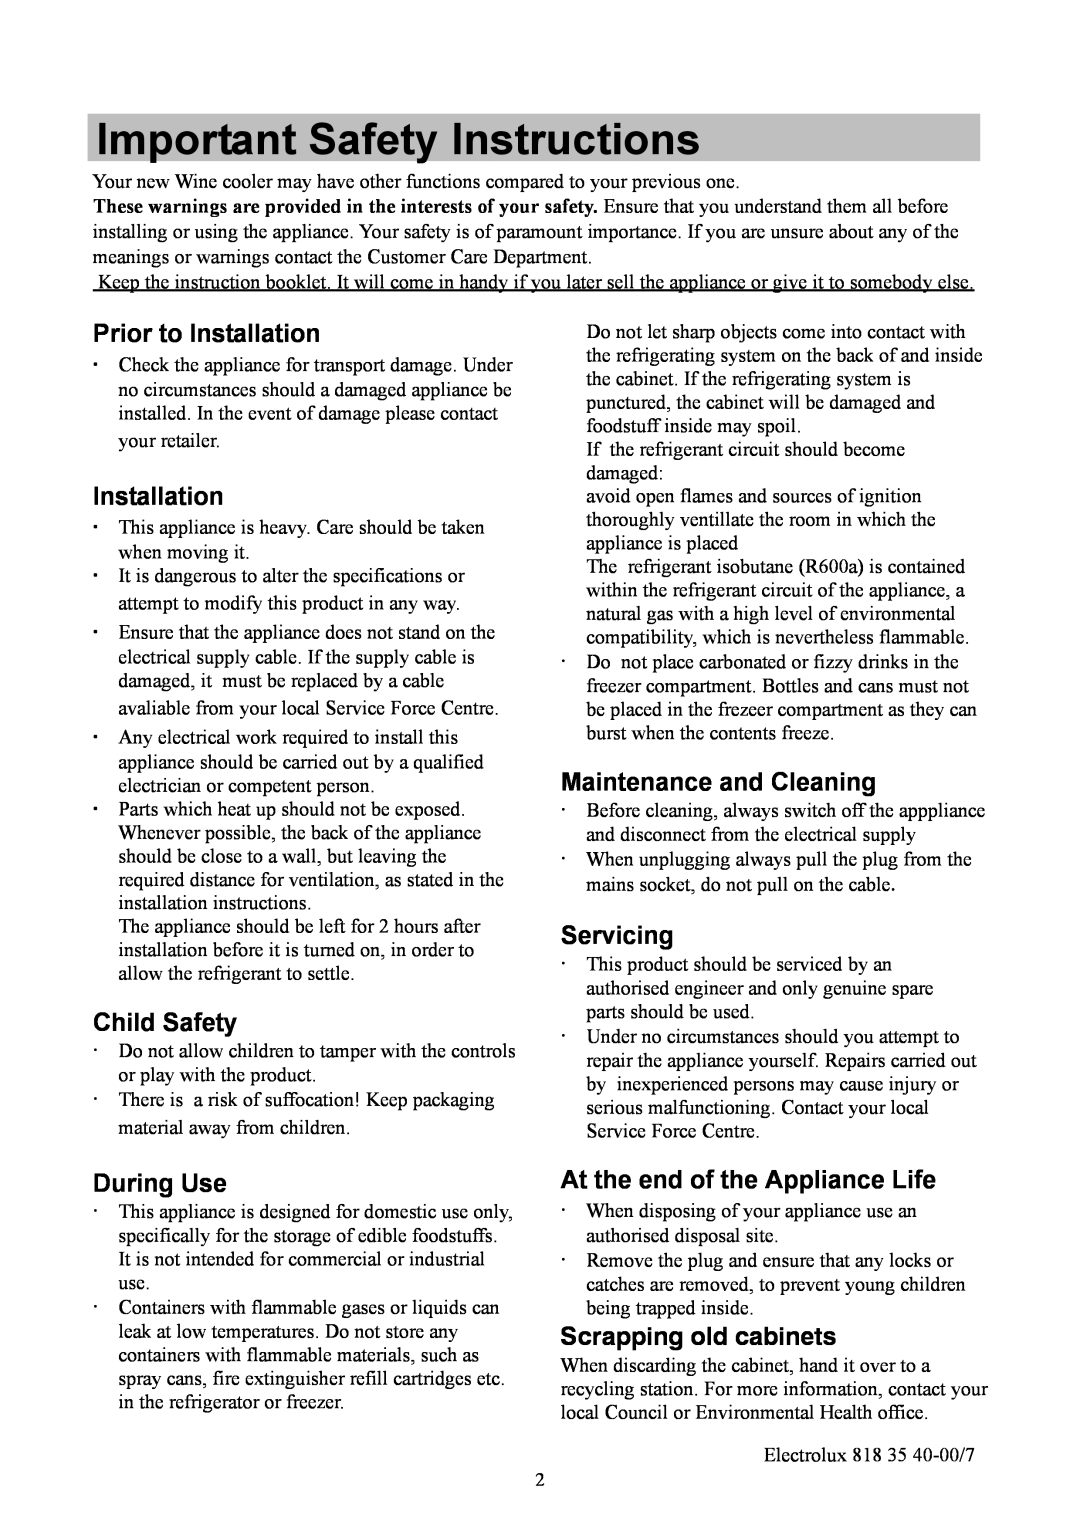 Electrolux ERC3711WS manual Important Safety Instructions, Prior to Installation, Child Safety, Maintenance and Cleaning 